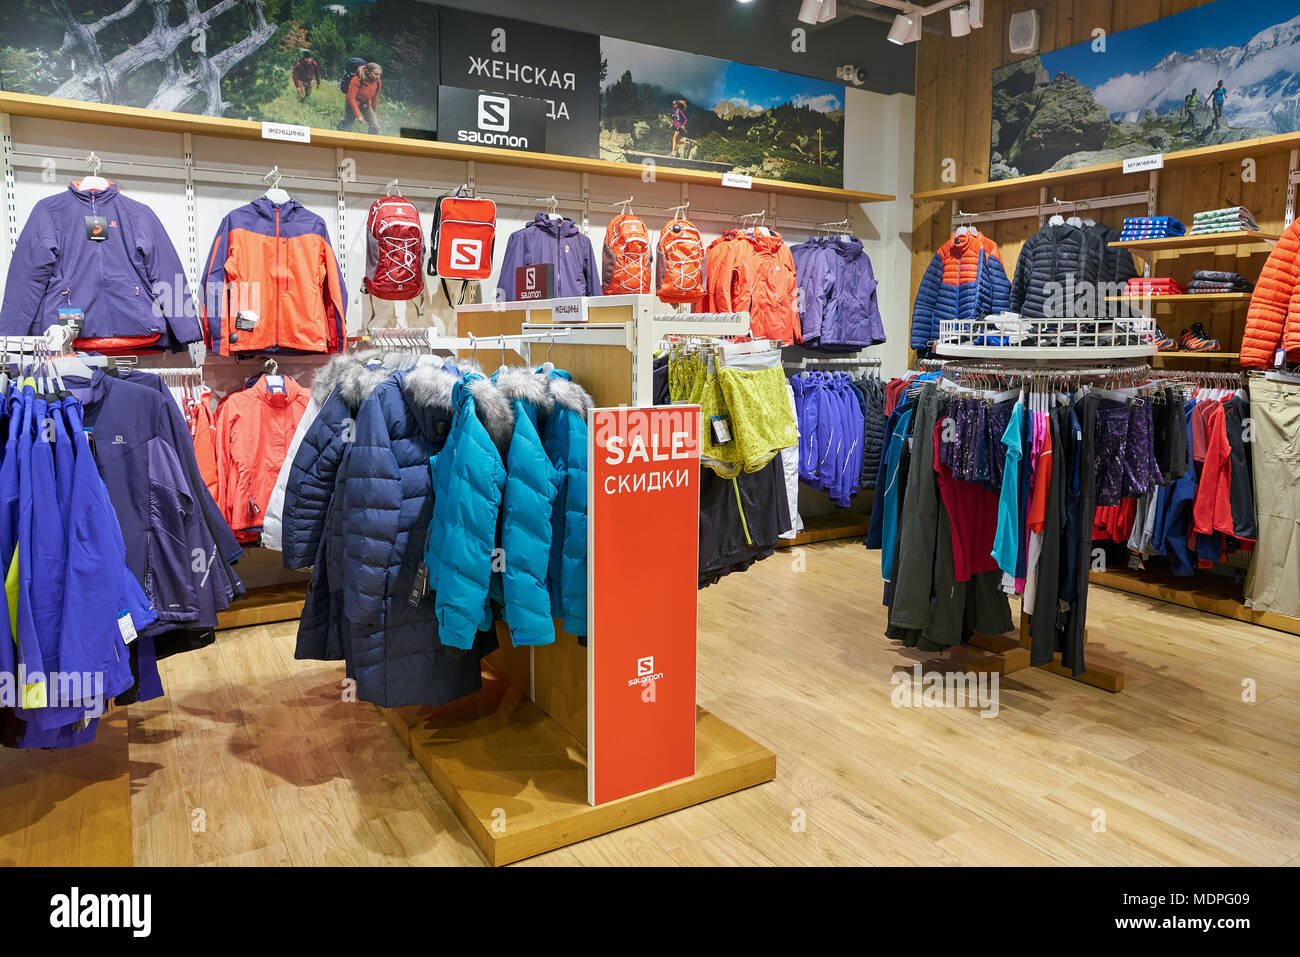 SAINT PETERSBURG, RUSSIA - CIRCA OCTOBER, 2017: inside Salomon store in Petersburg. The Salomon Group is a sports equipment manufacturing compan Stock Photo - Alamy